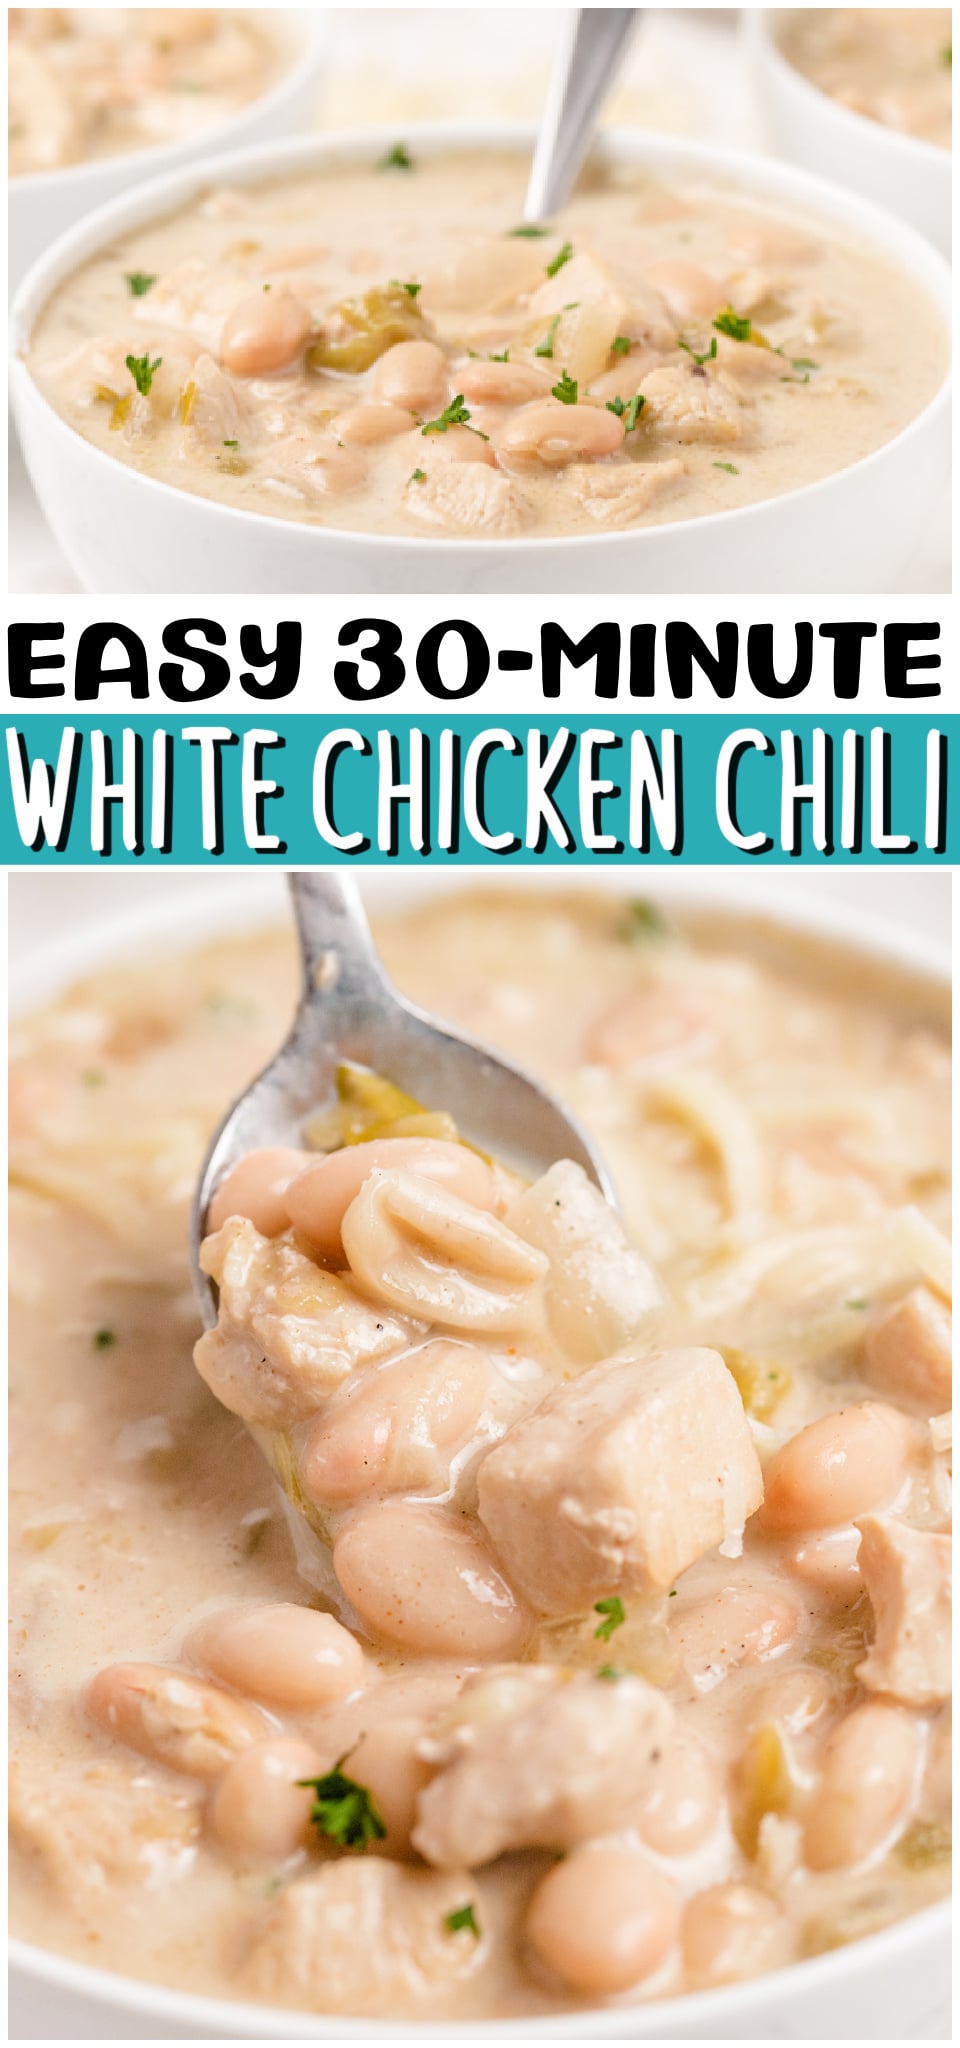 White Chicken Chili is a delicious & comforting meal packed with white beans, chicken, and green chilies. Takes only 30 minutes from start to finish! #chili #chicken #beans #dinner #easyrecipe from BUTTER WITH A SIDE OF BREAD